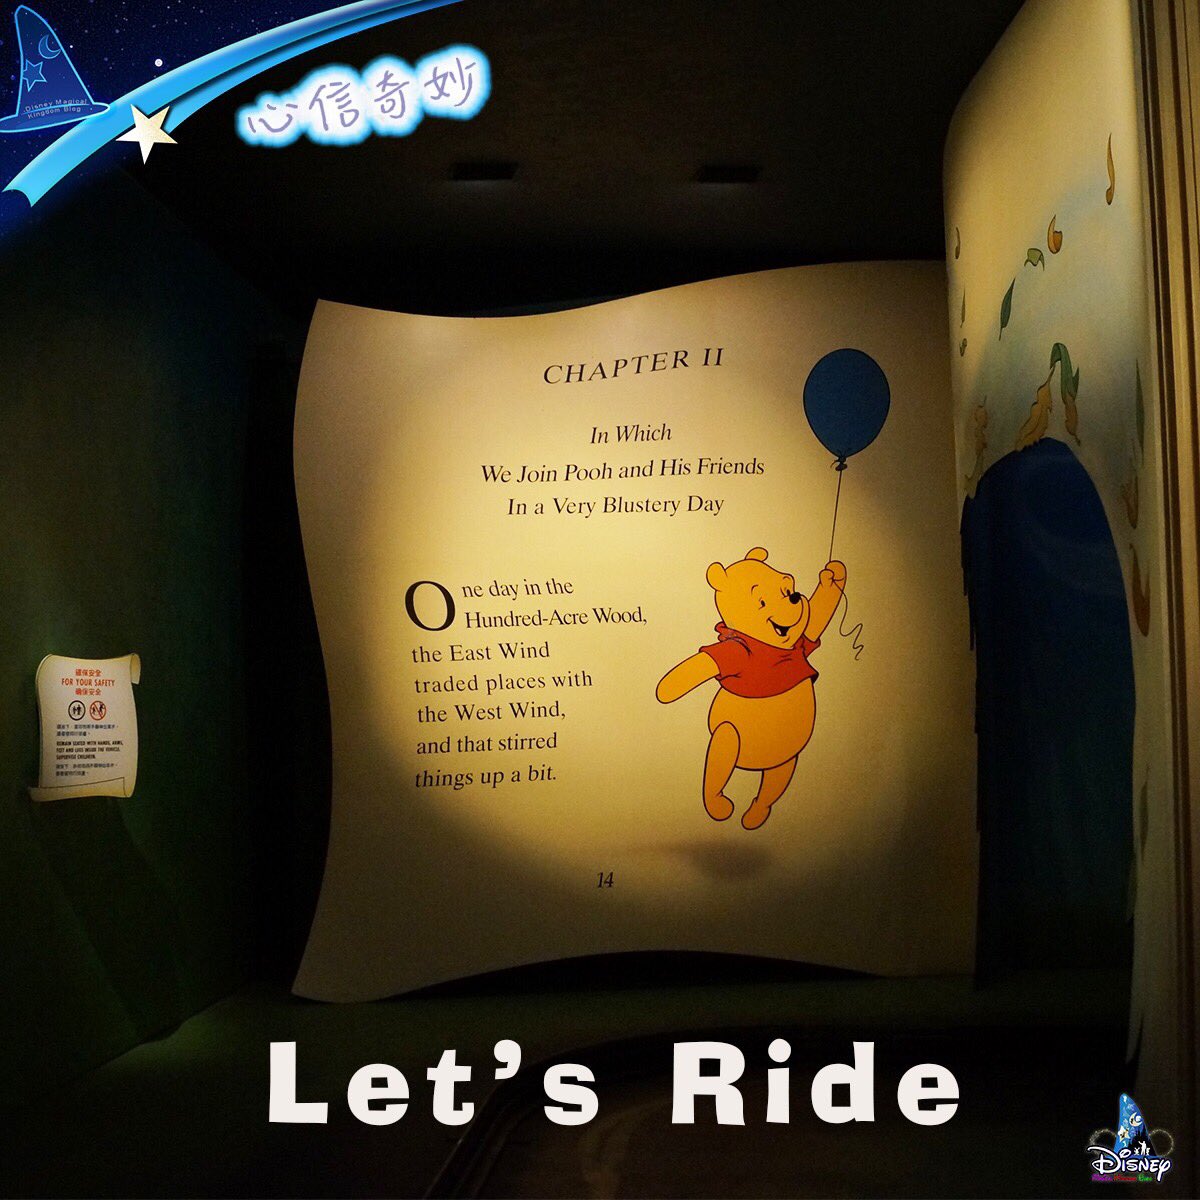 Do you miss #HongKongDisneyland?  Come to join us for a virtual ride as you journey to the enchanted world of Hundred Acre.

🍯🐝 Let's Ride 'The Many Adventures of Winnie the Pooh': youtu.be/wLZQOVs6Wek

#Disney #DisneyParks #HKDL #DisneyMagicMoments #BelieveInMagic #心信奇妙